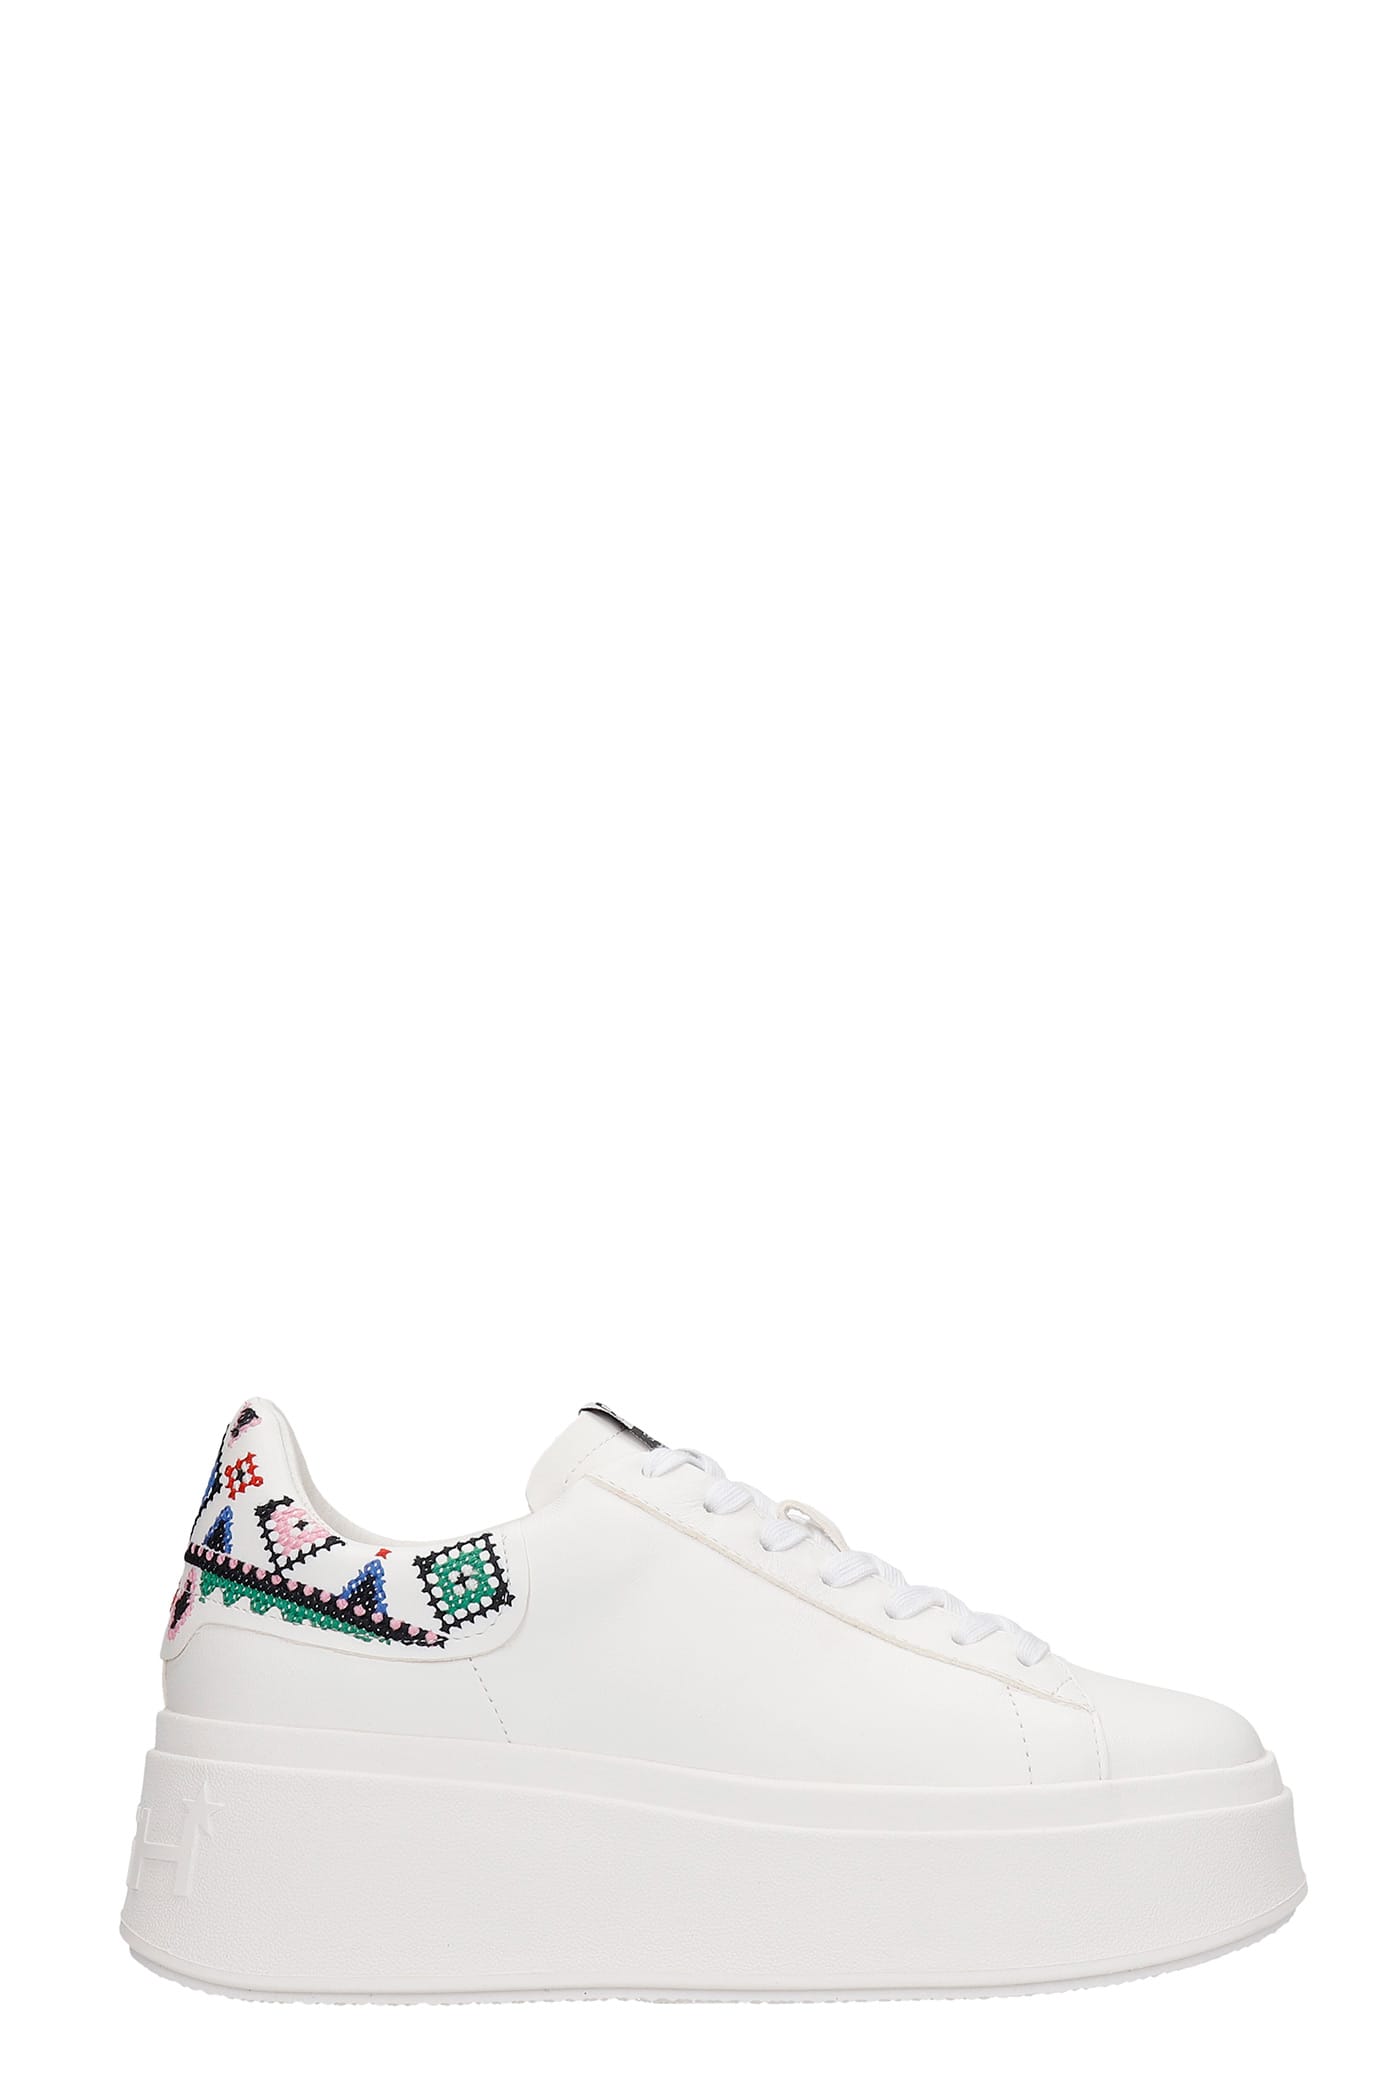 Ash Moby Ethnic 01 Sneakers In White Leather